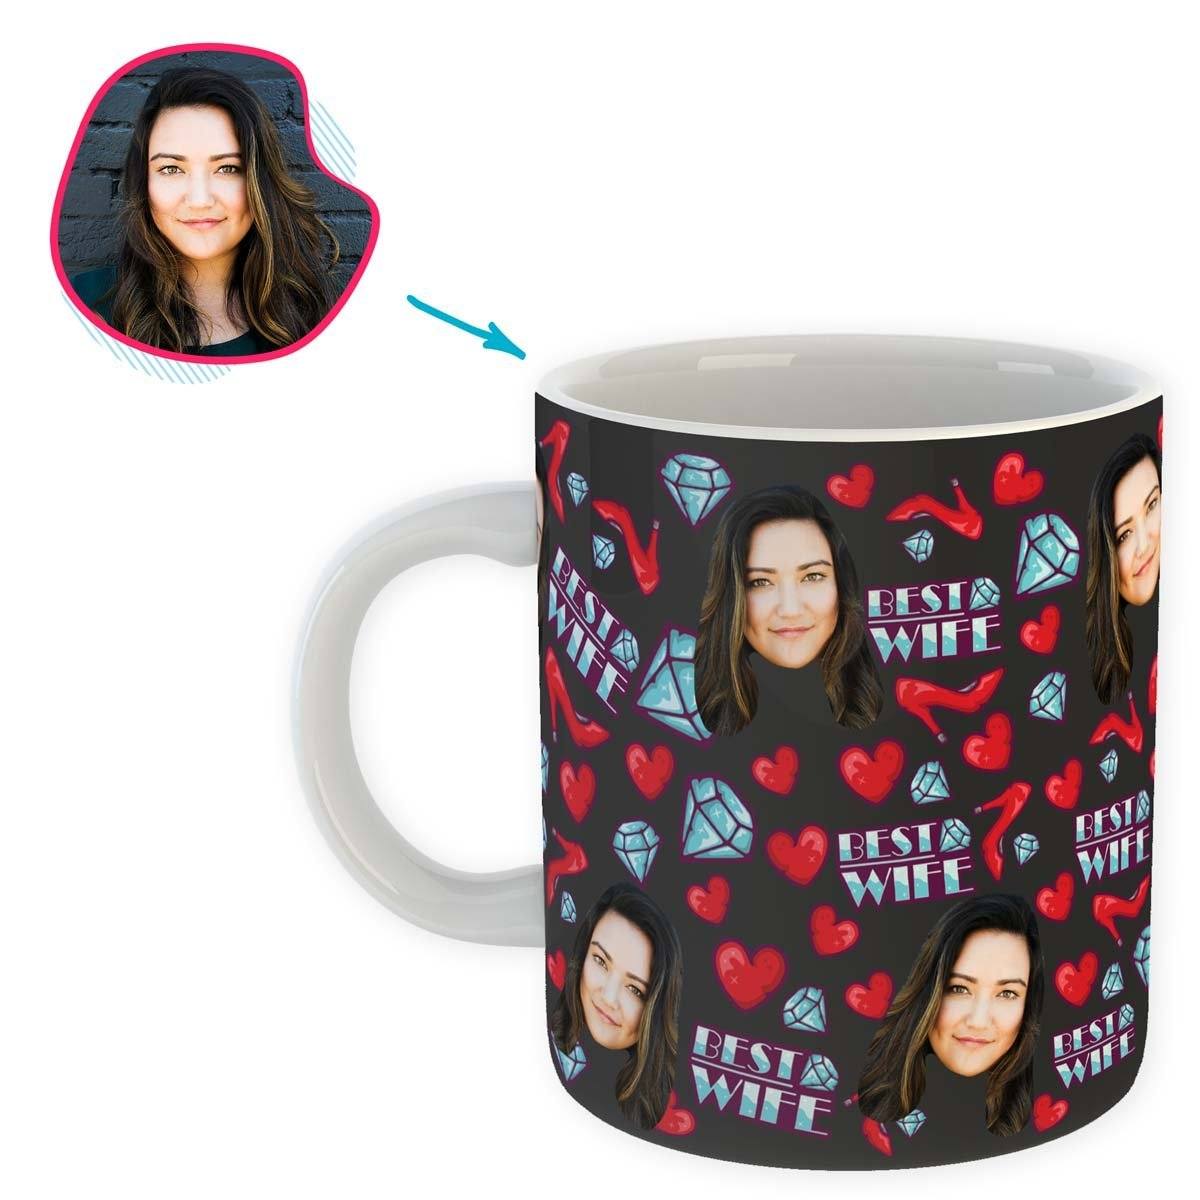 Dark Wife personalized mug with photo of face printed on it